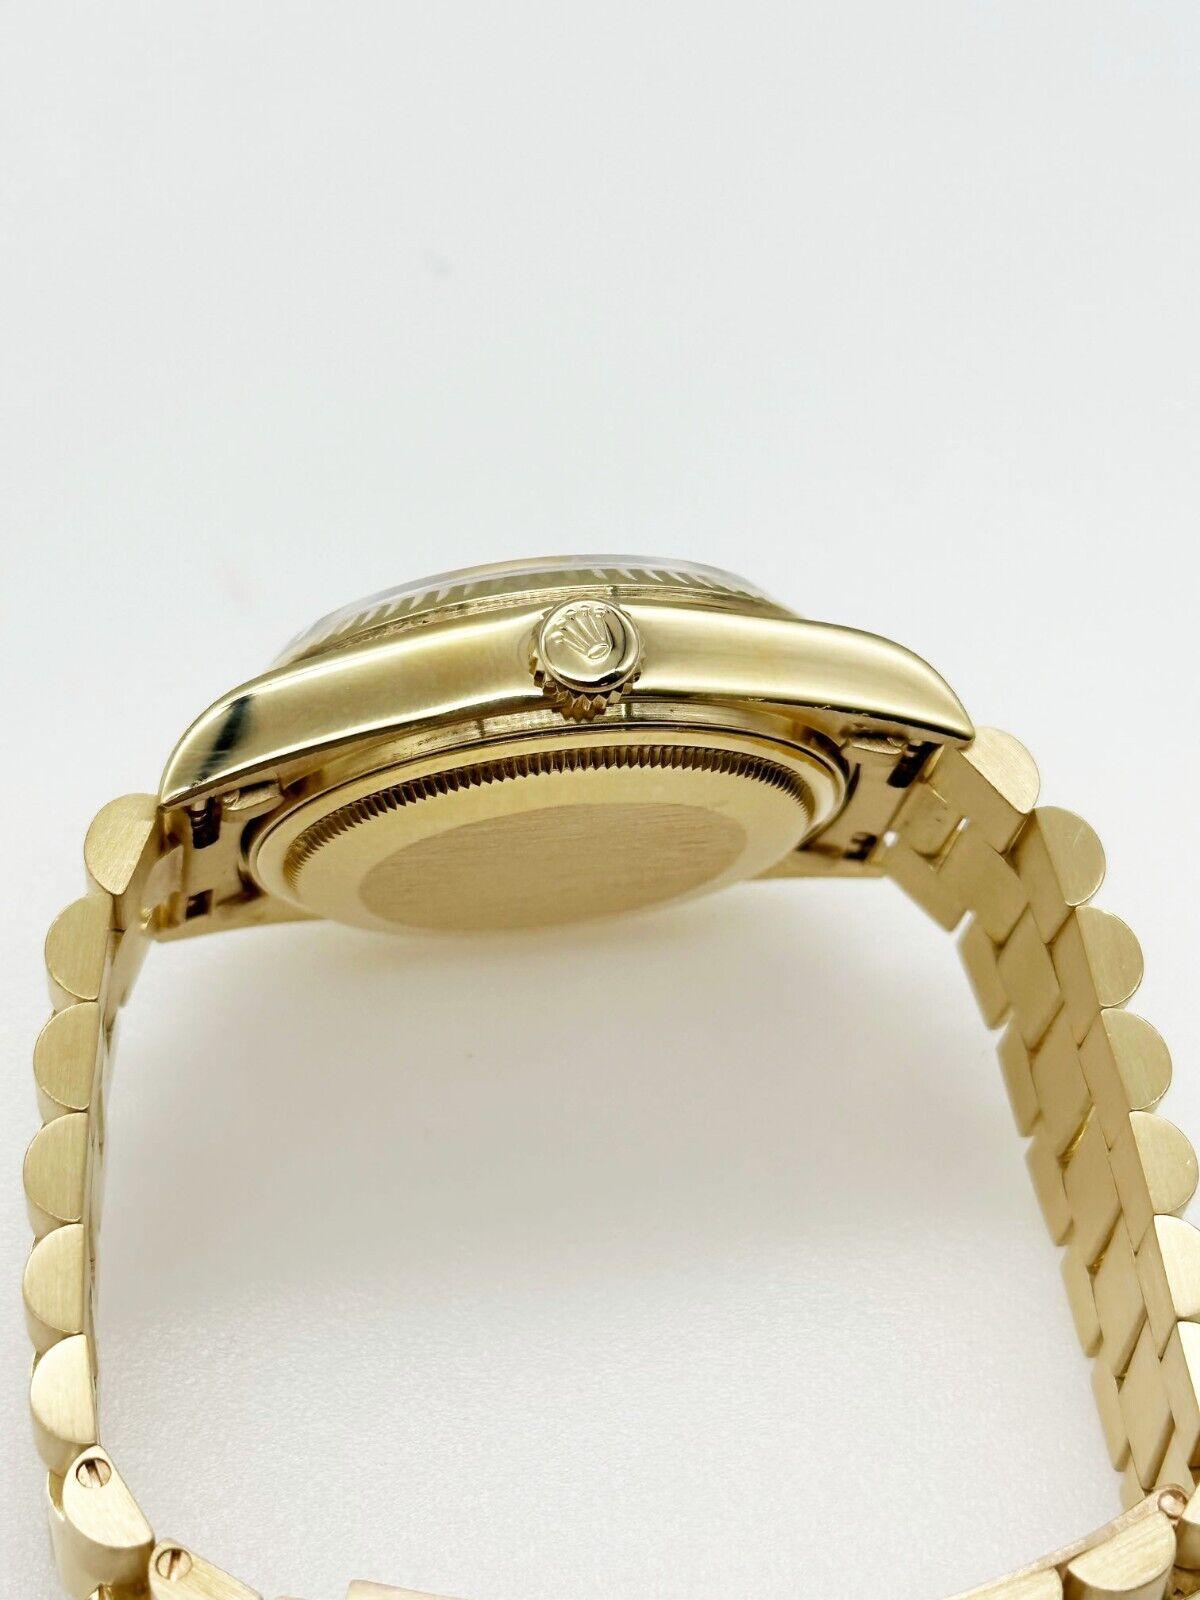 Rolex 18038 President Day Date Champagne Dial 18K Yellow Gold In Excellent Condition For Sale In San Diego, CA